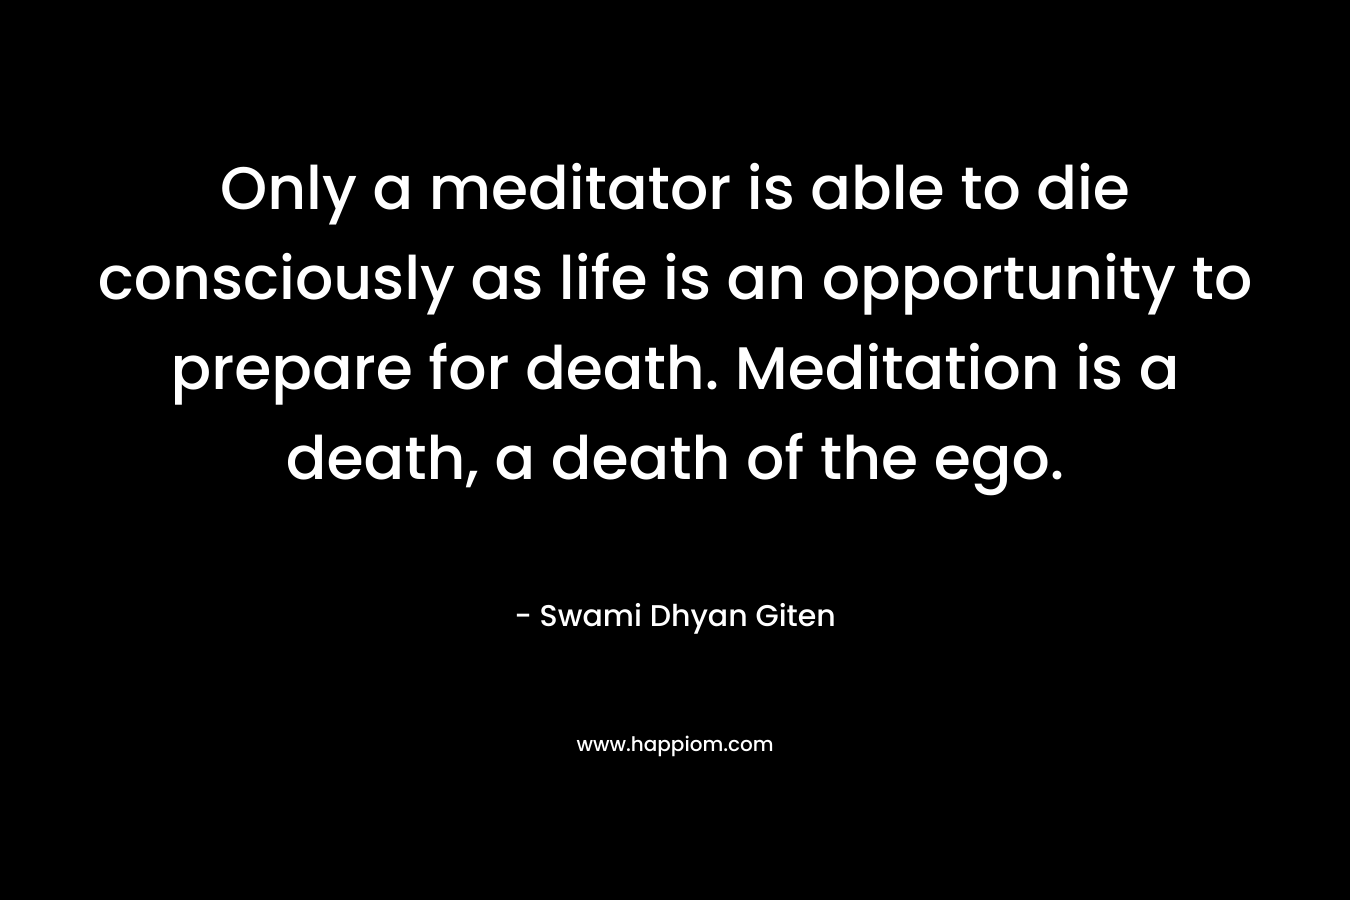 Only a meditator is able to die consciously as life is an opportunity to prepare for death. Meditation is a death, a death of the ego.